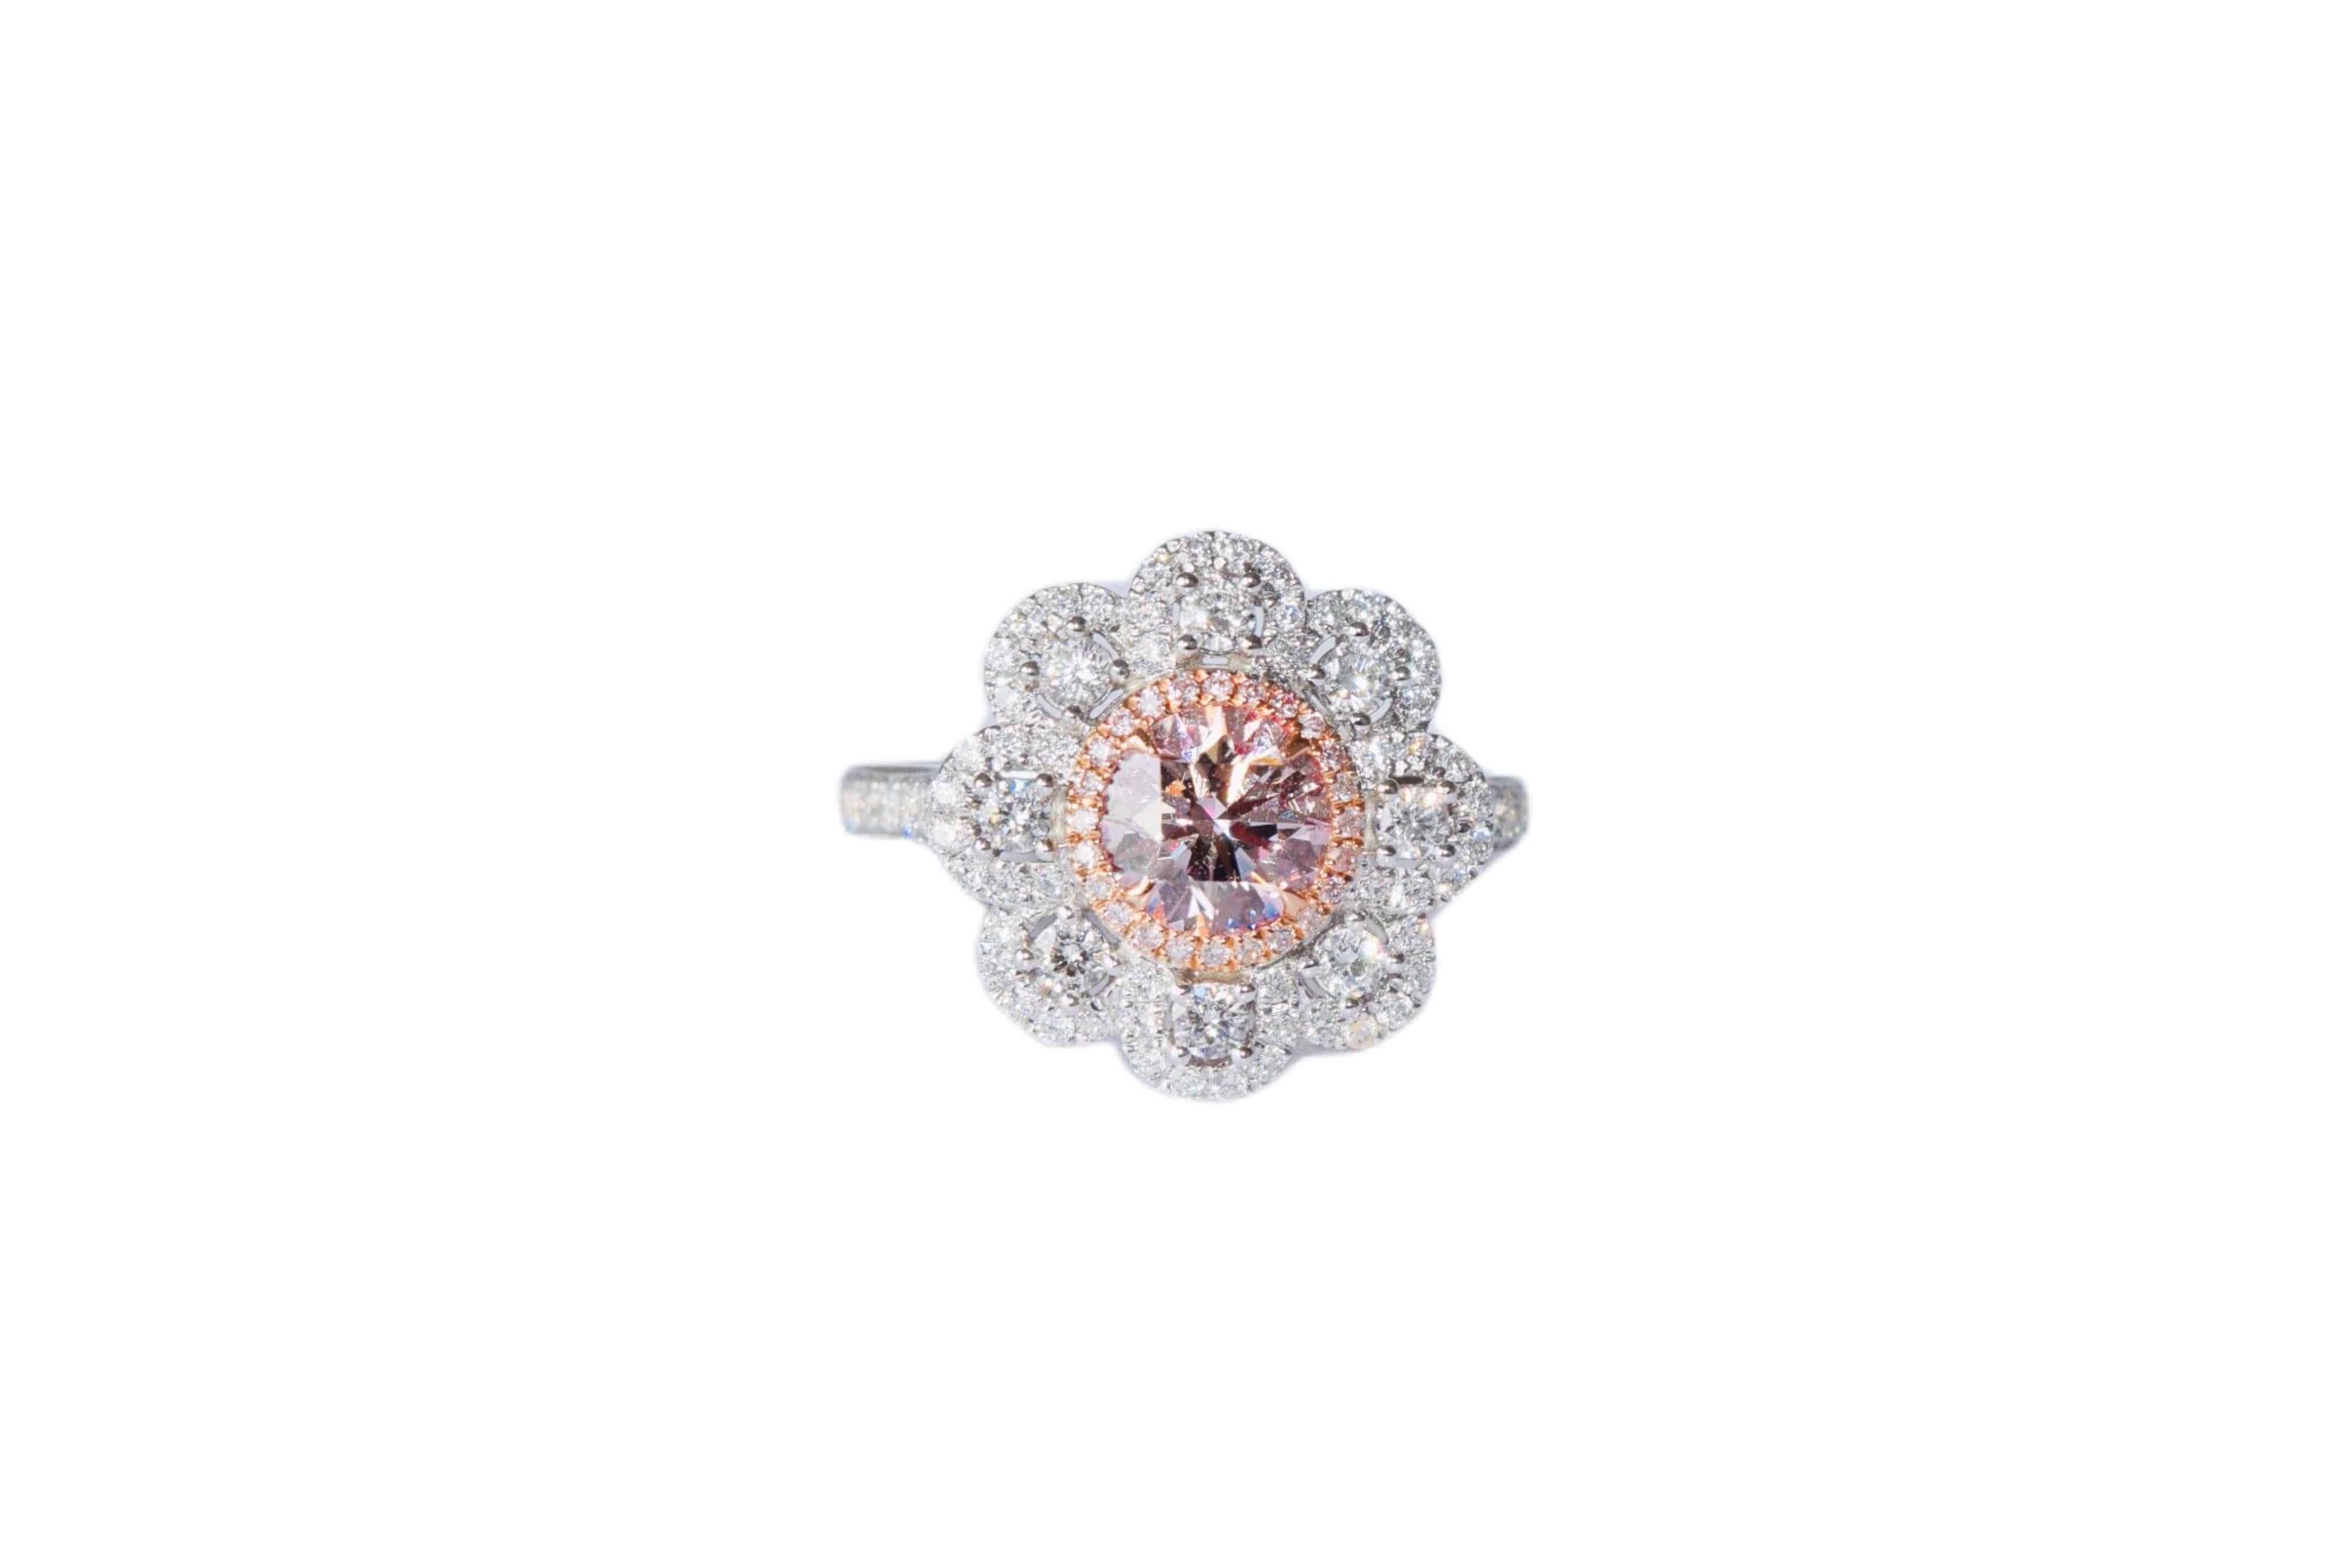 0.92 Carat Very Light Pink Diamond Ring VS2 Clarity GIA Certified For Sale 3